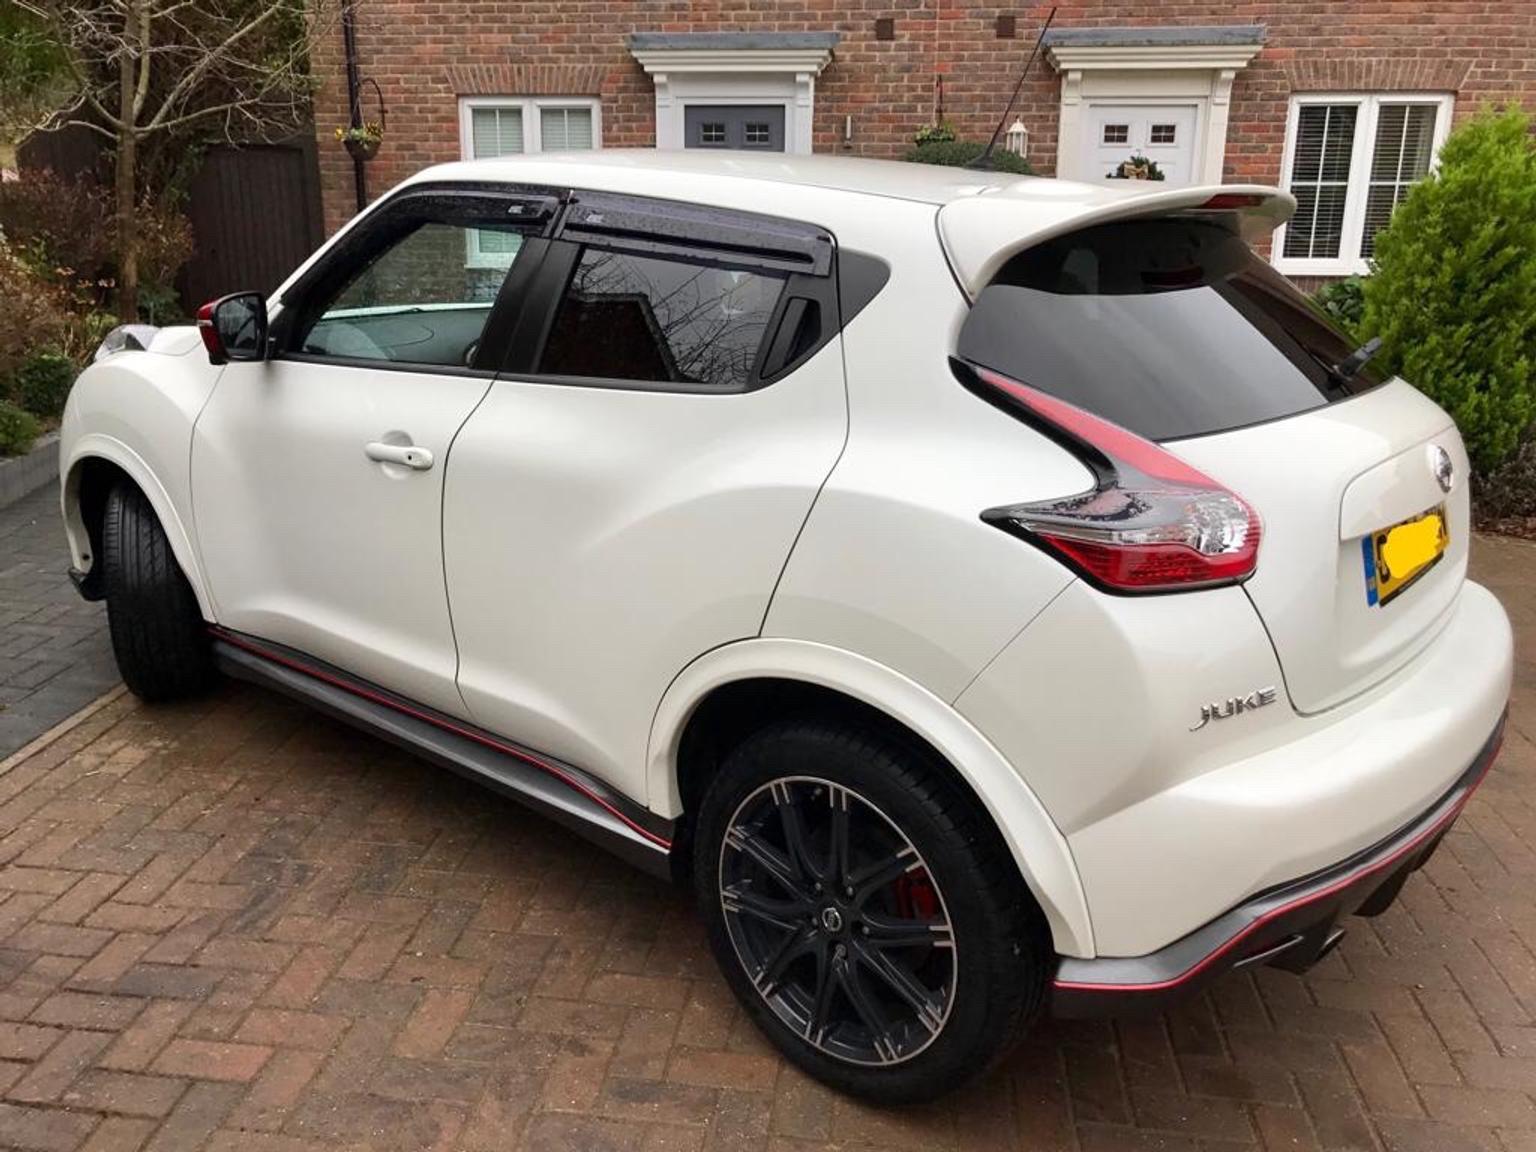 Nissan Juke Nismo RS in Braintree for £11,000.00 for sale